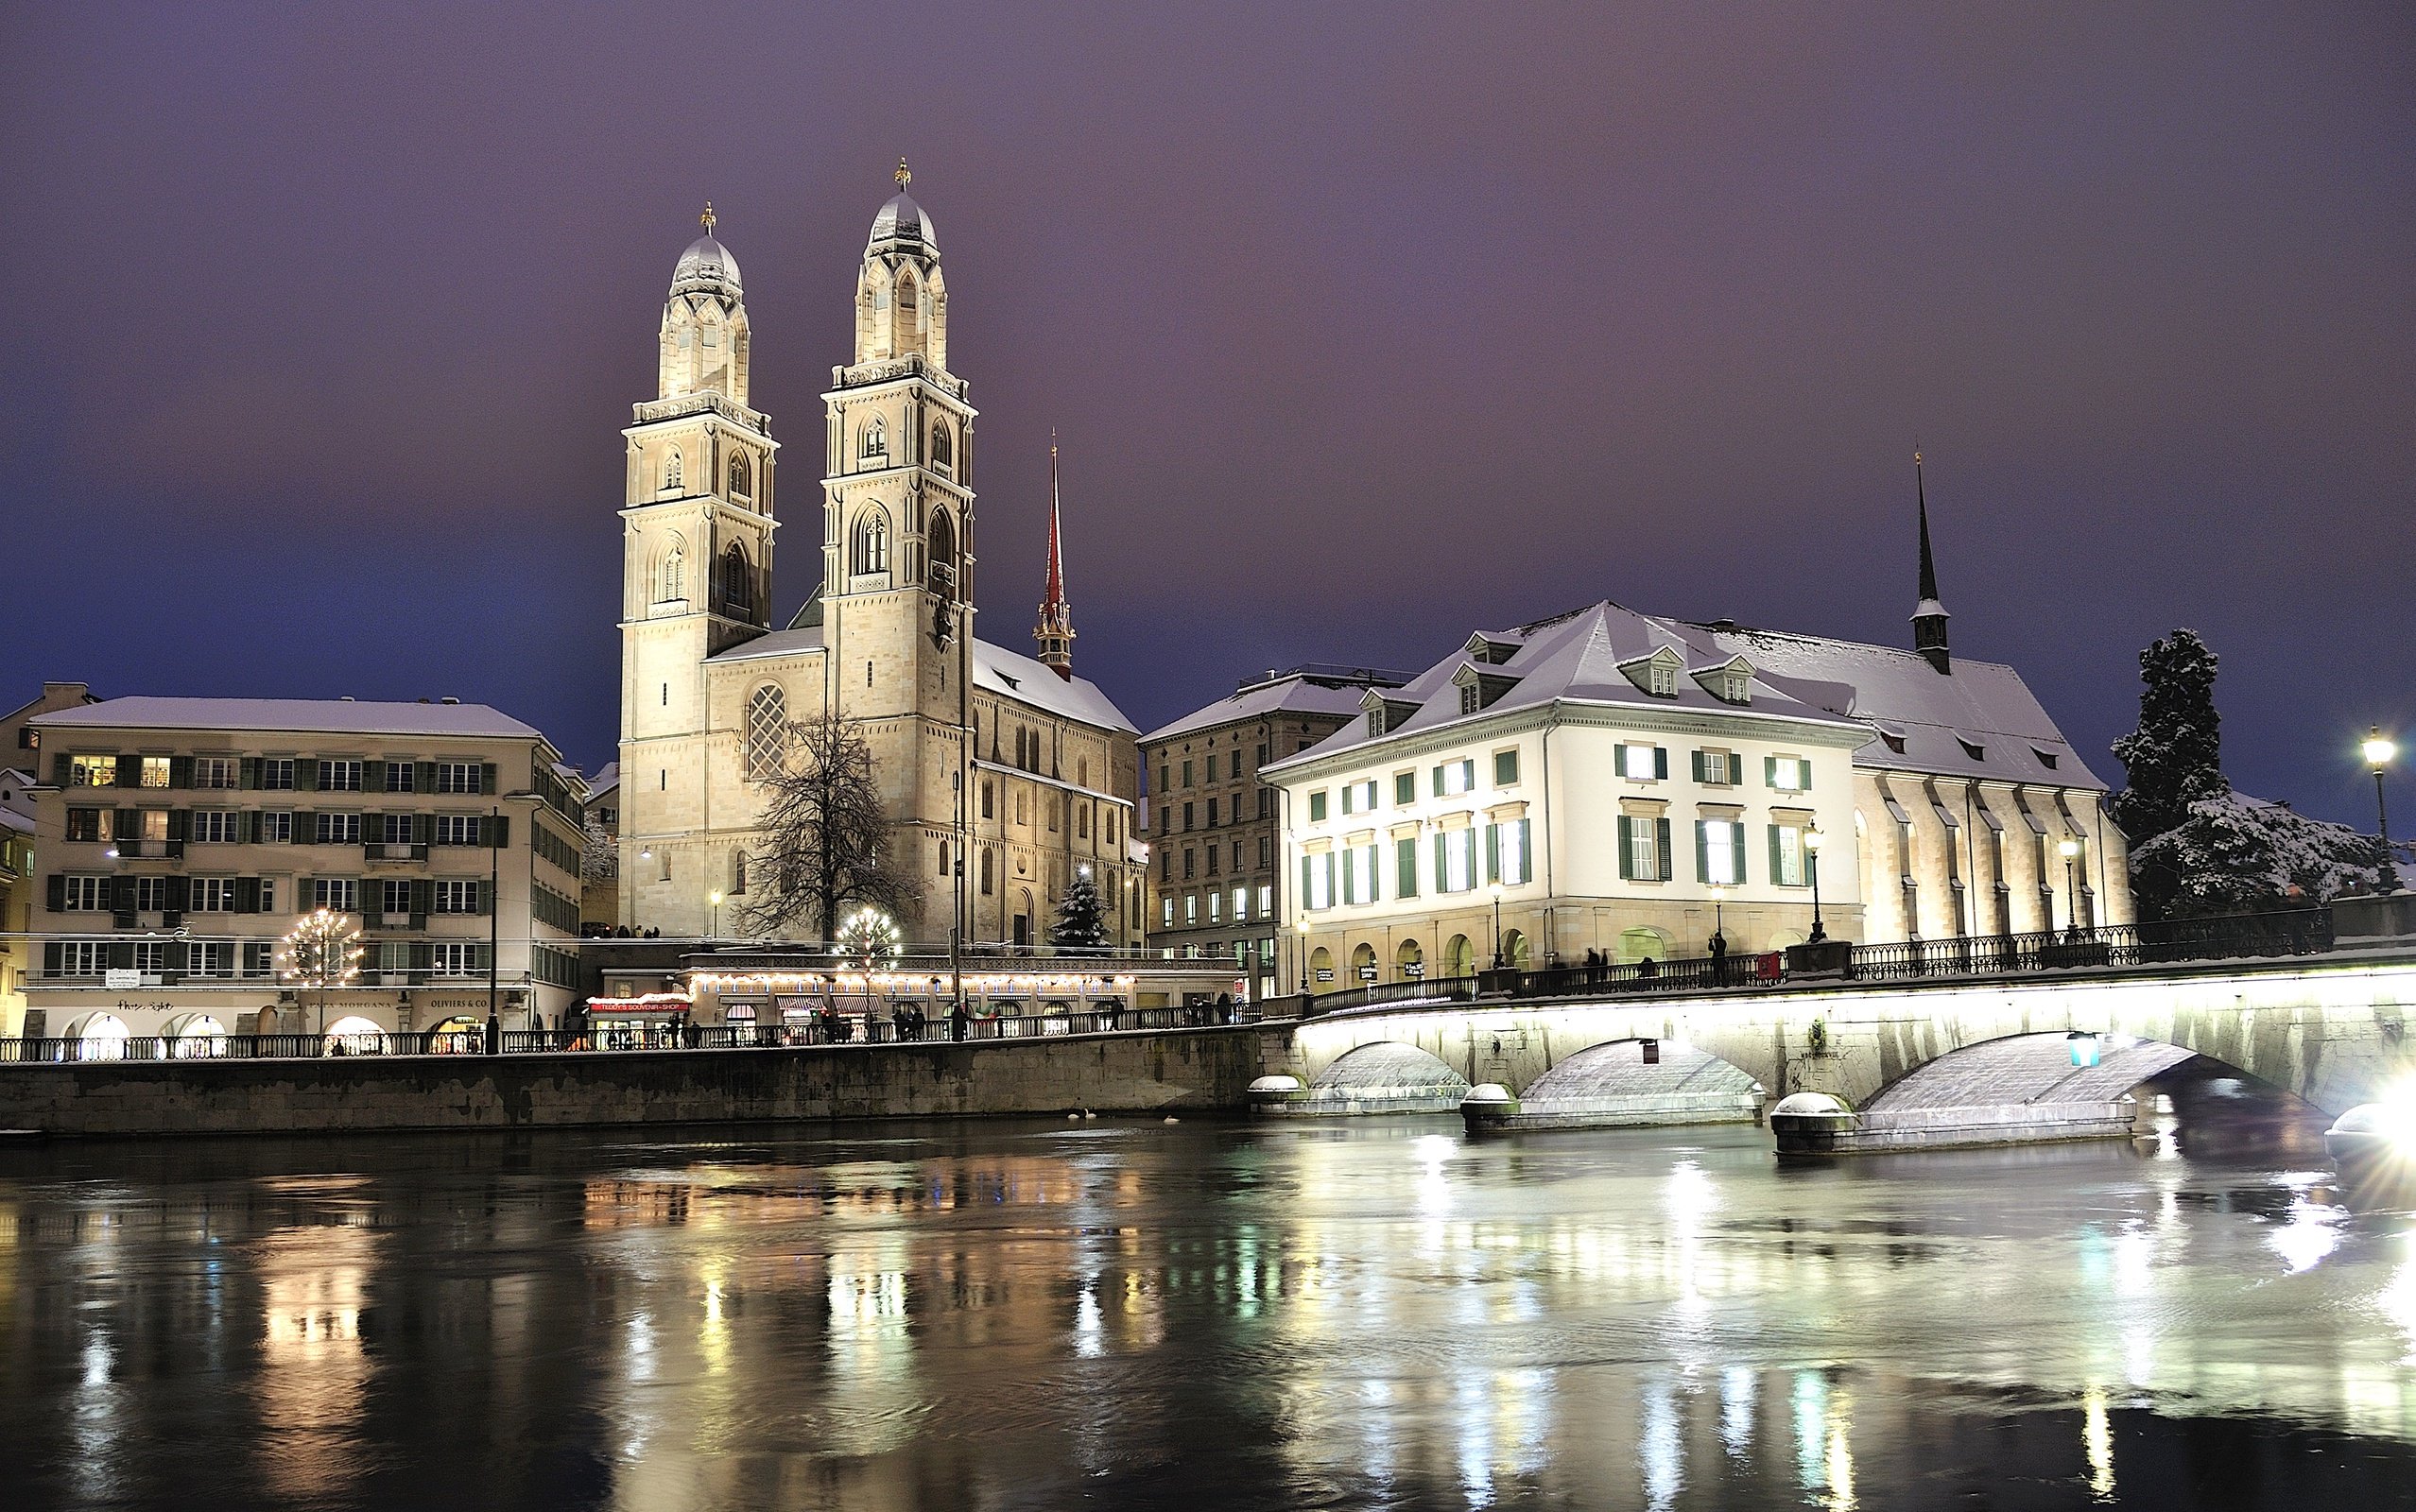 architecture, Building, City, Cityscape, Bridge, Cathedral, Zurich, Switzerland, Night, Lights, River, Reflection, Old building, Winter, Snow Wallpaper